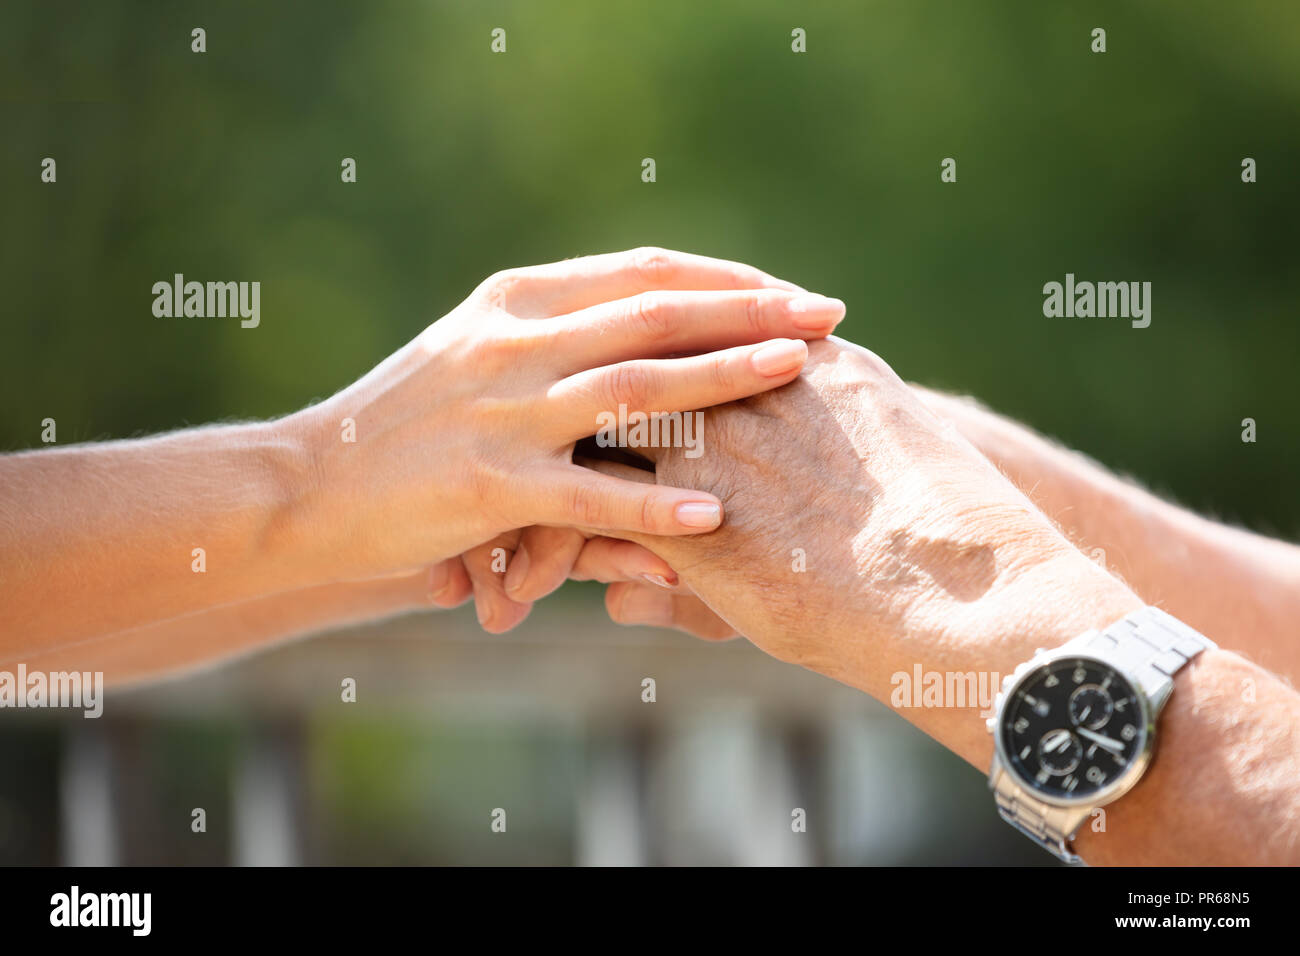 Close-up Of A Woman Holding Her Father's Hand At Outdoors Stock Photo